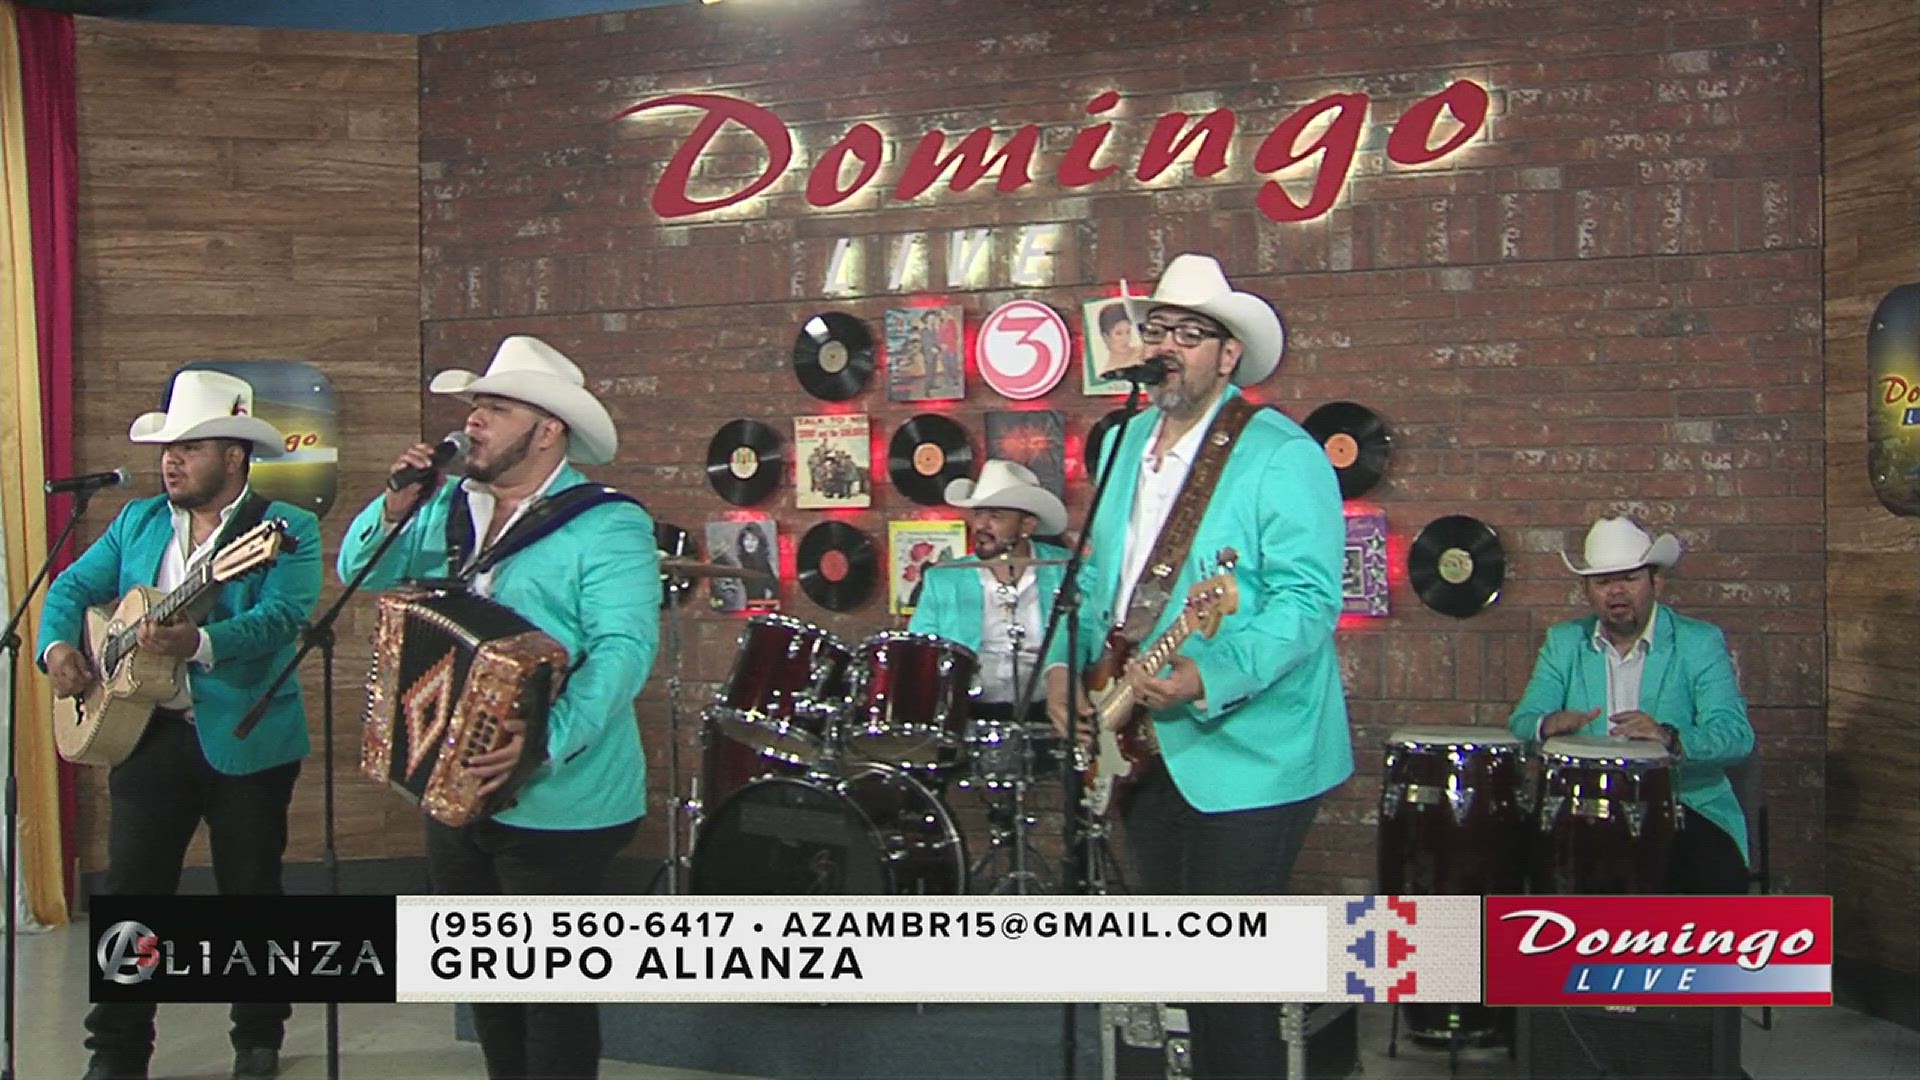 Plamview-based Tejano group joined Domingo Live to perform their song "Chiqui Baby".